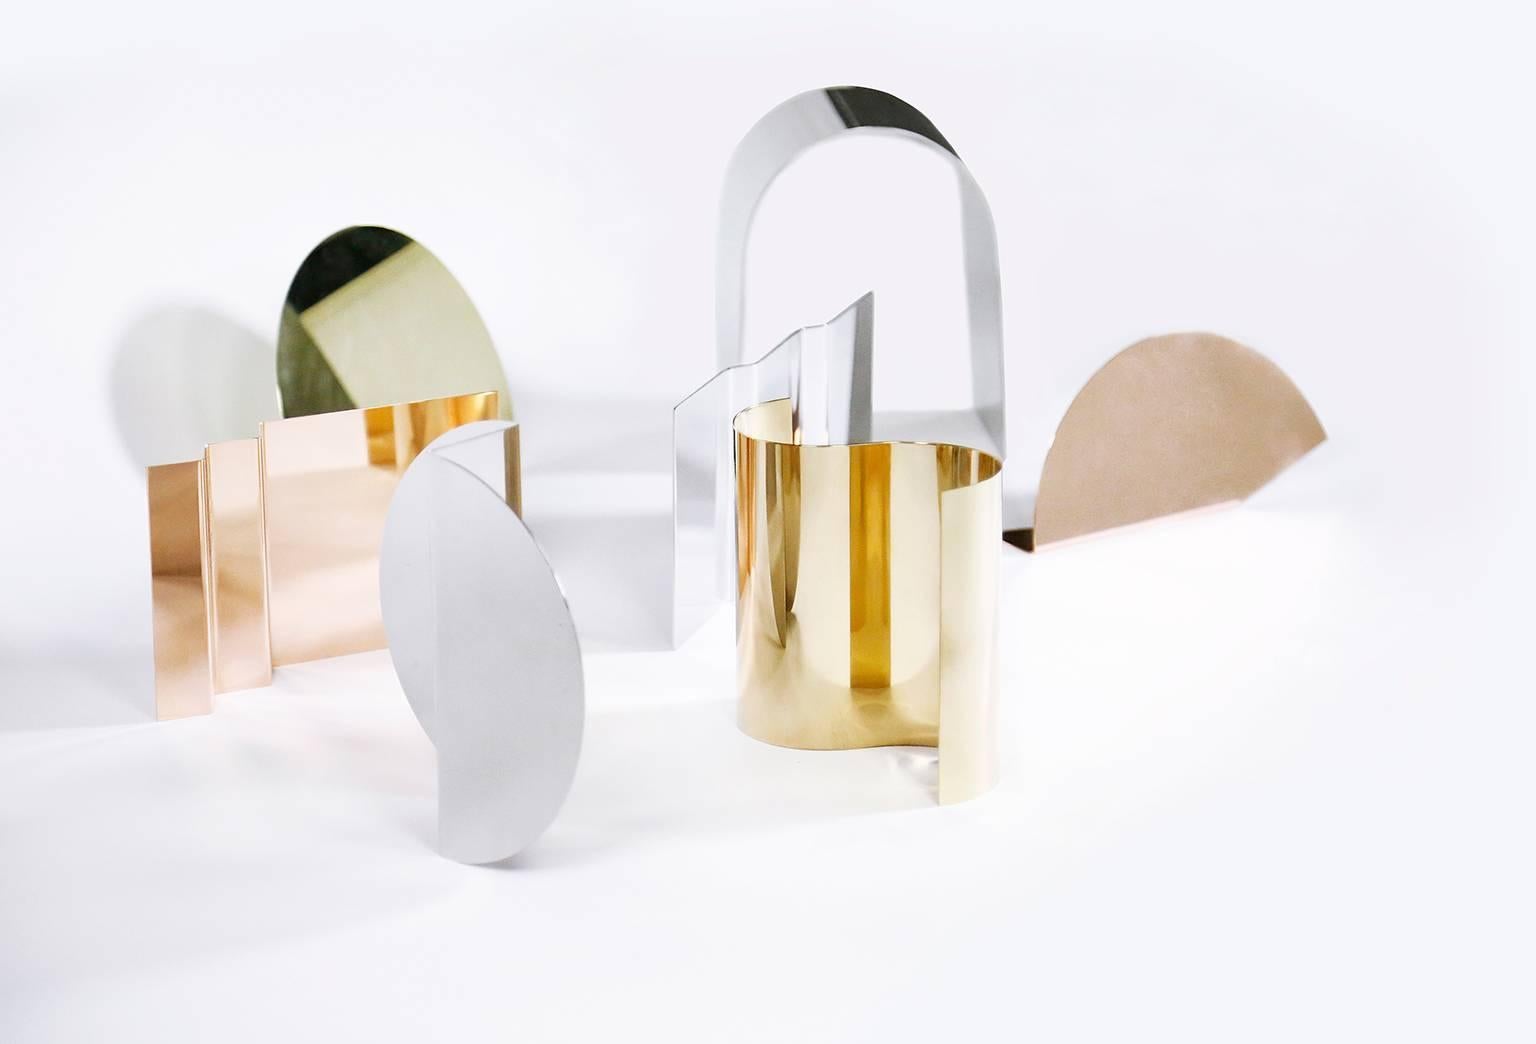 Polished 'Bent Mirrors' Minimalist Objects in Bronze, Brass, Copper, Stainless Steel For Sale